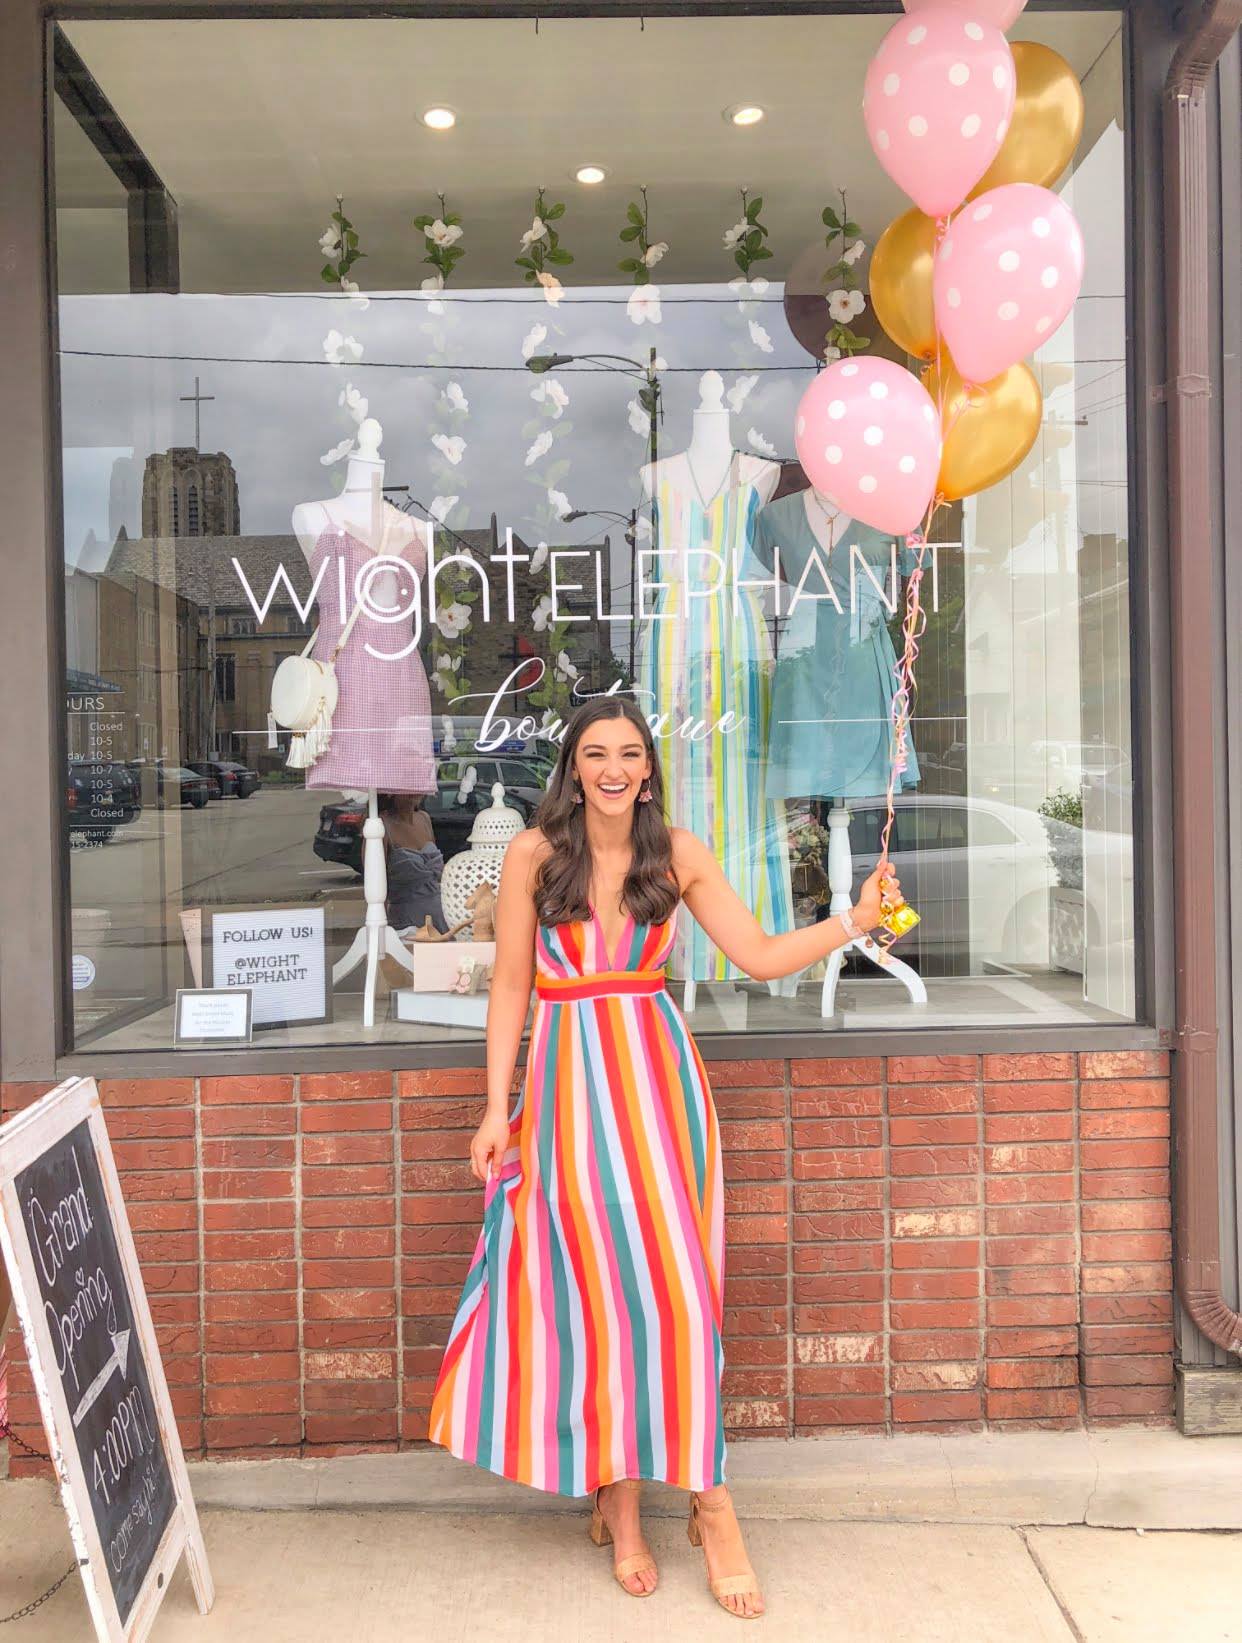 Wight Elephant Boutique to Open Second Location in Greensburg